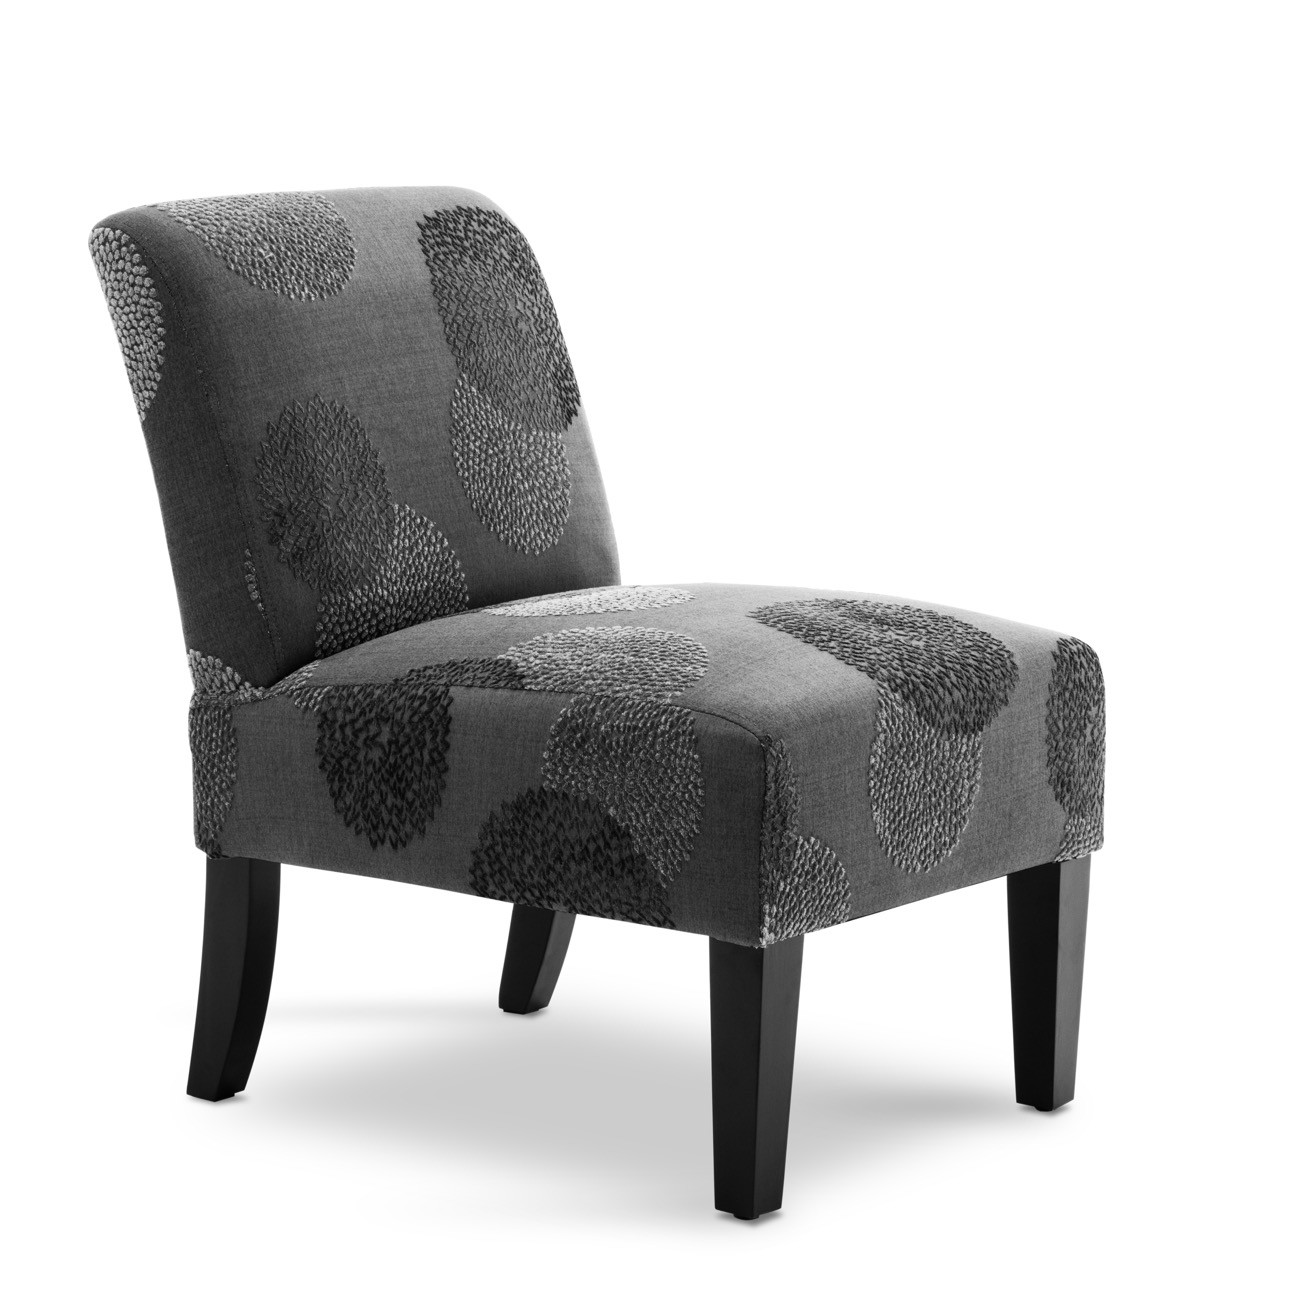 Armless Living Room Chairs
 BELLEZE Armless Contemporary Upholstered Single Curved